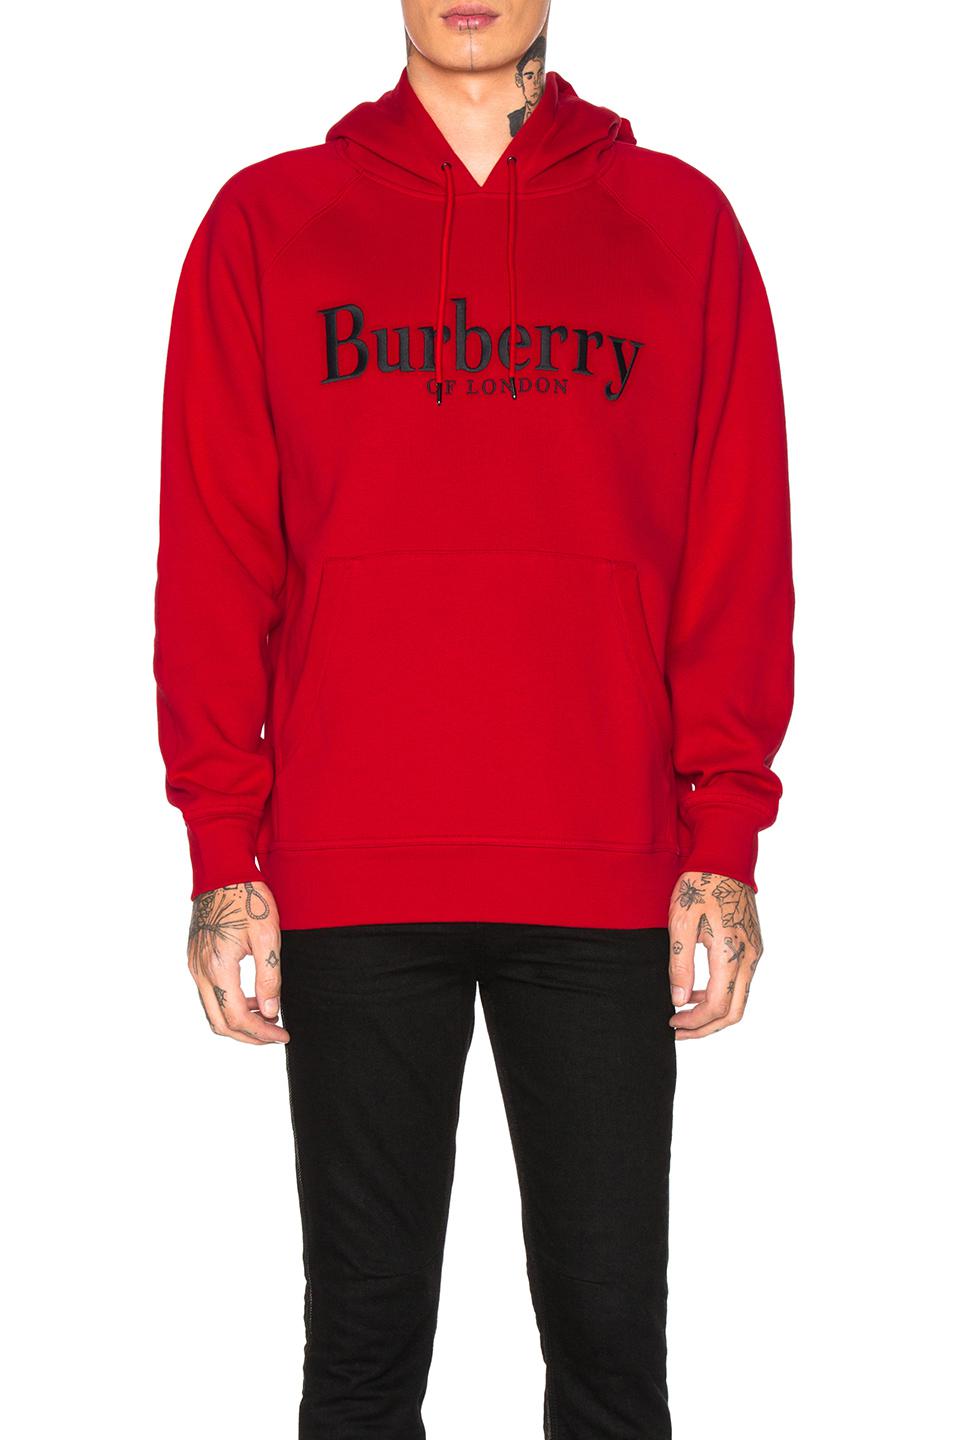 Burberry Hoodie Red Hotsell, 41% OFF | www.angloamericancentre.it